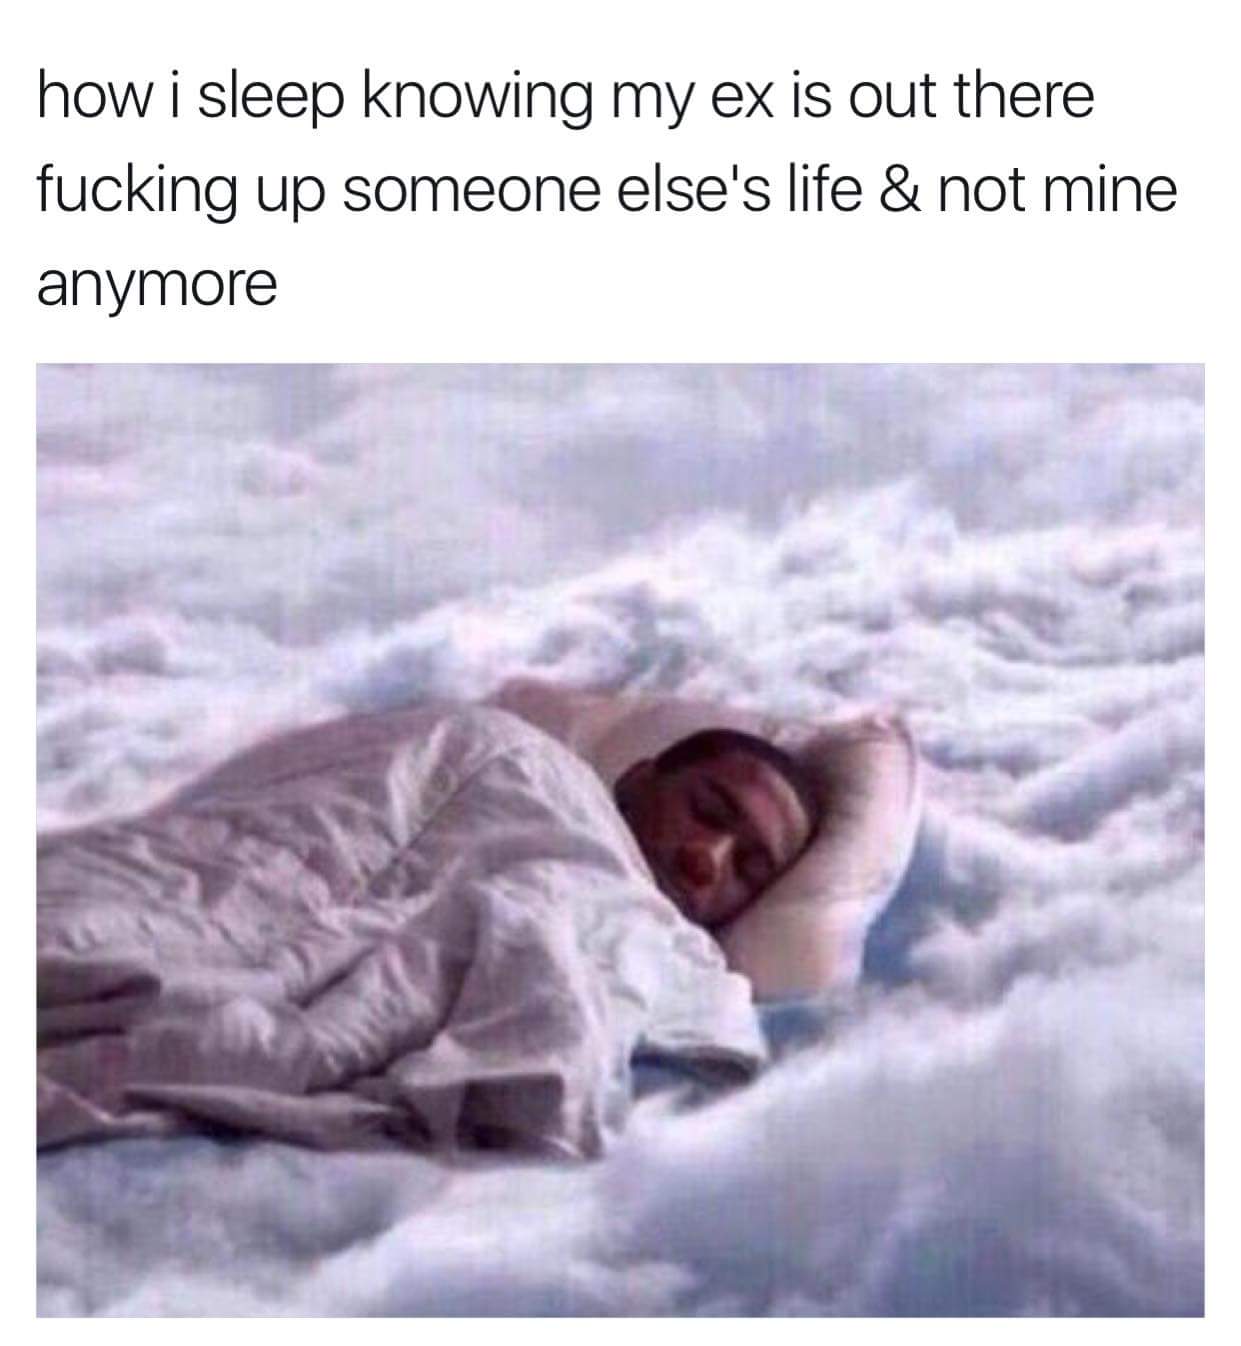 Meme of person sleeping really soundly captioned as how it feels knowing your ex is out there messing up someone else's life.